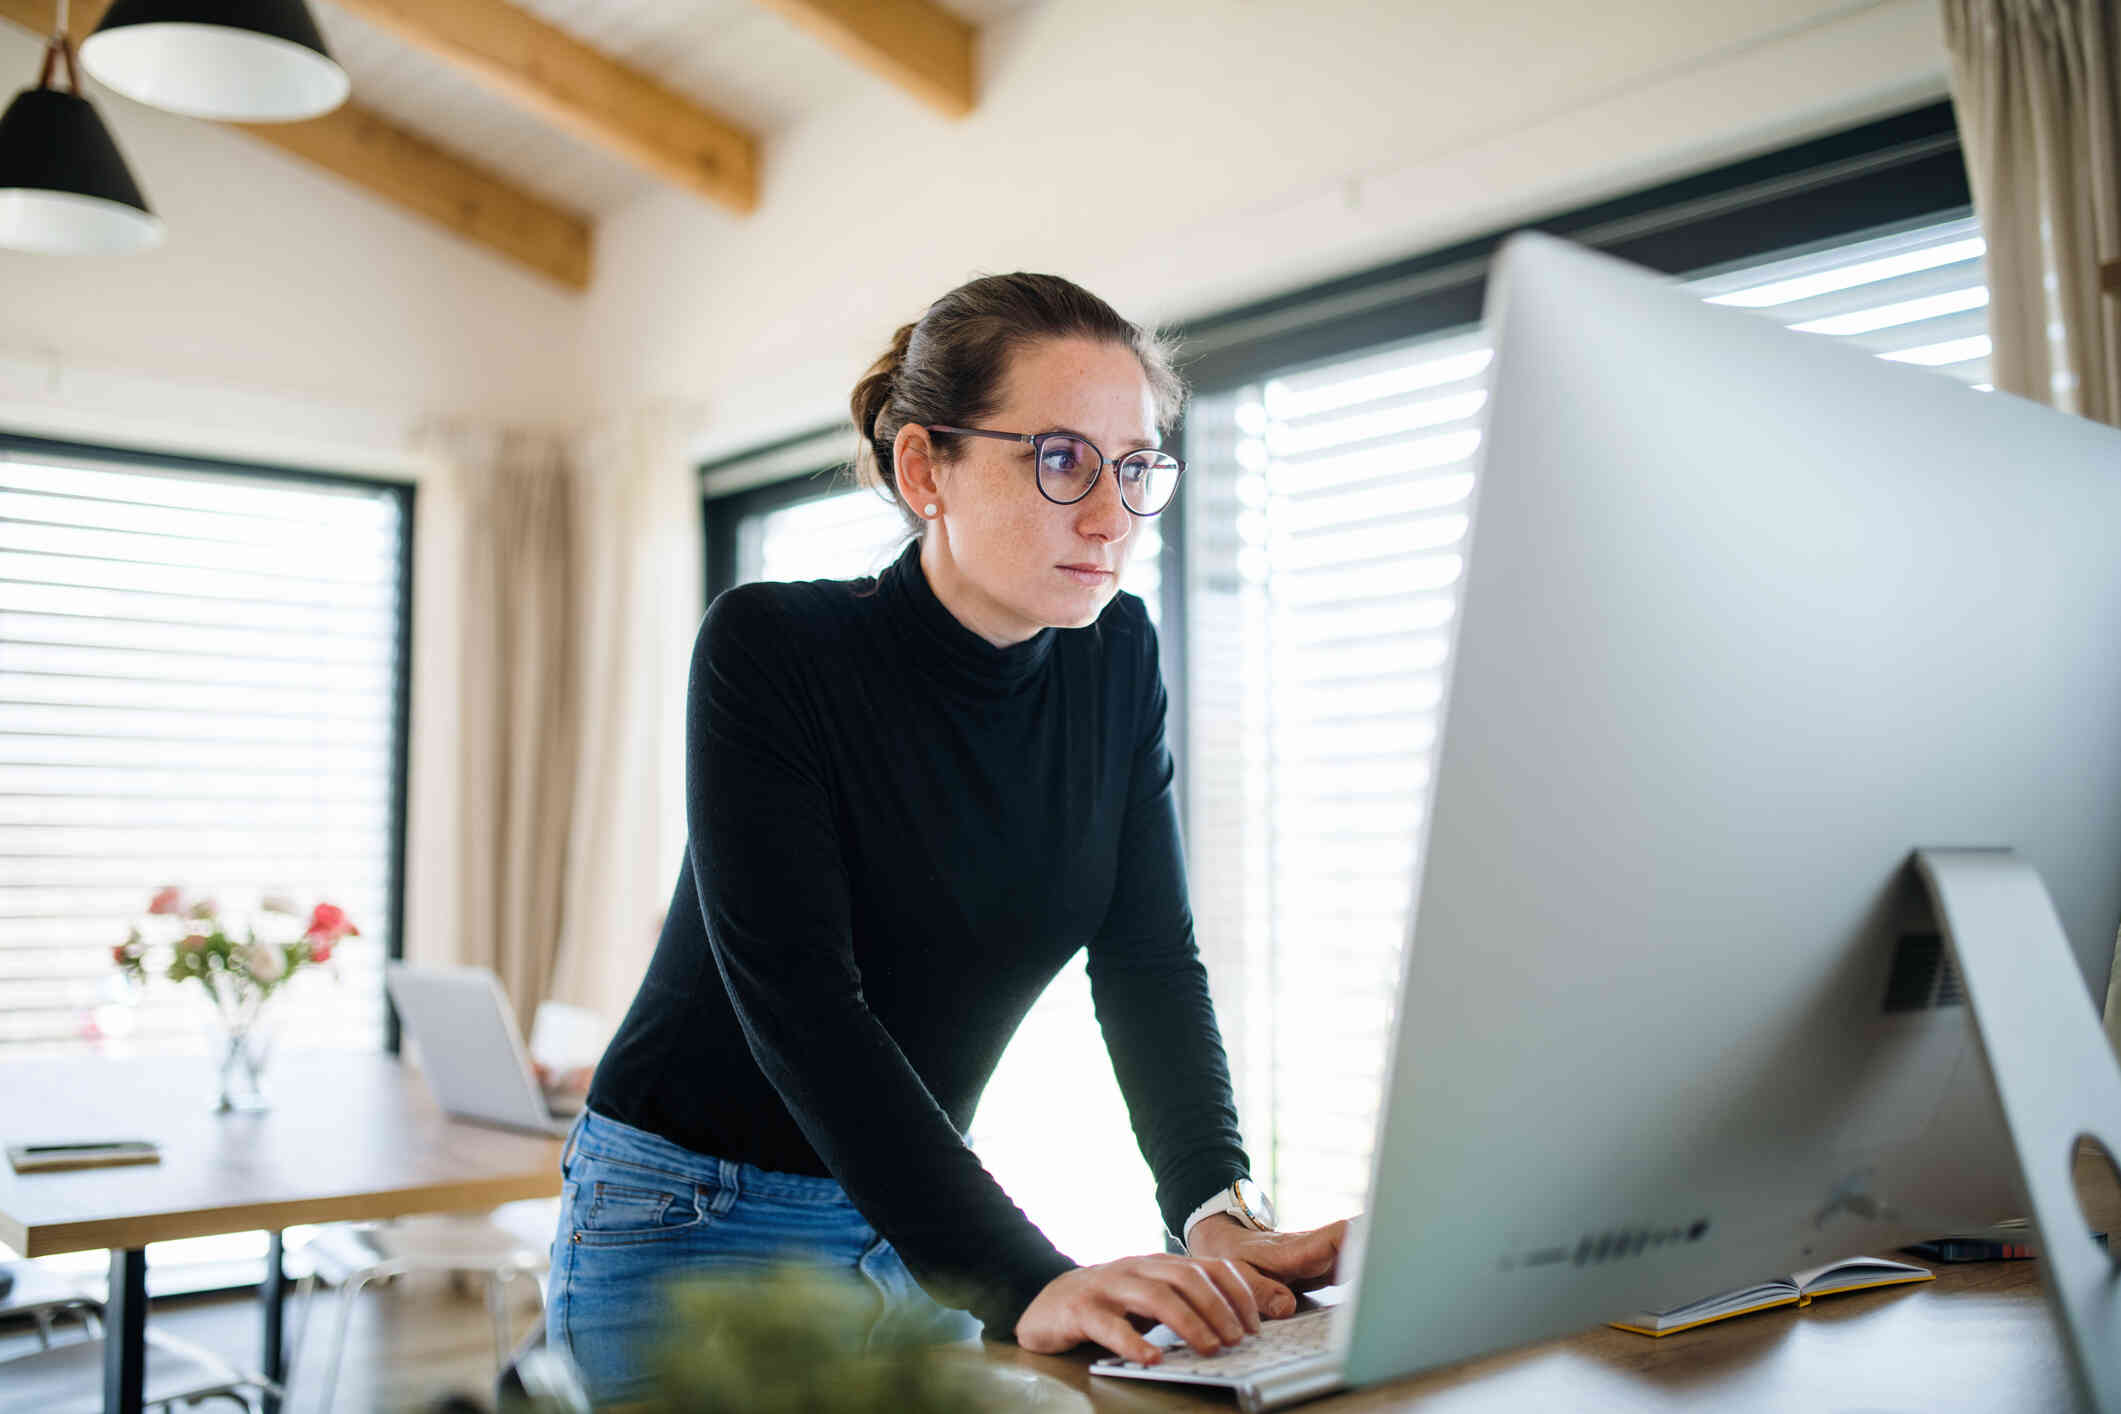 A woman in a black shirt and glasses sits at a counter in her home infront of her computer while typing with a serious expression.